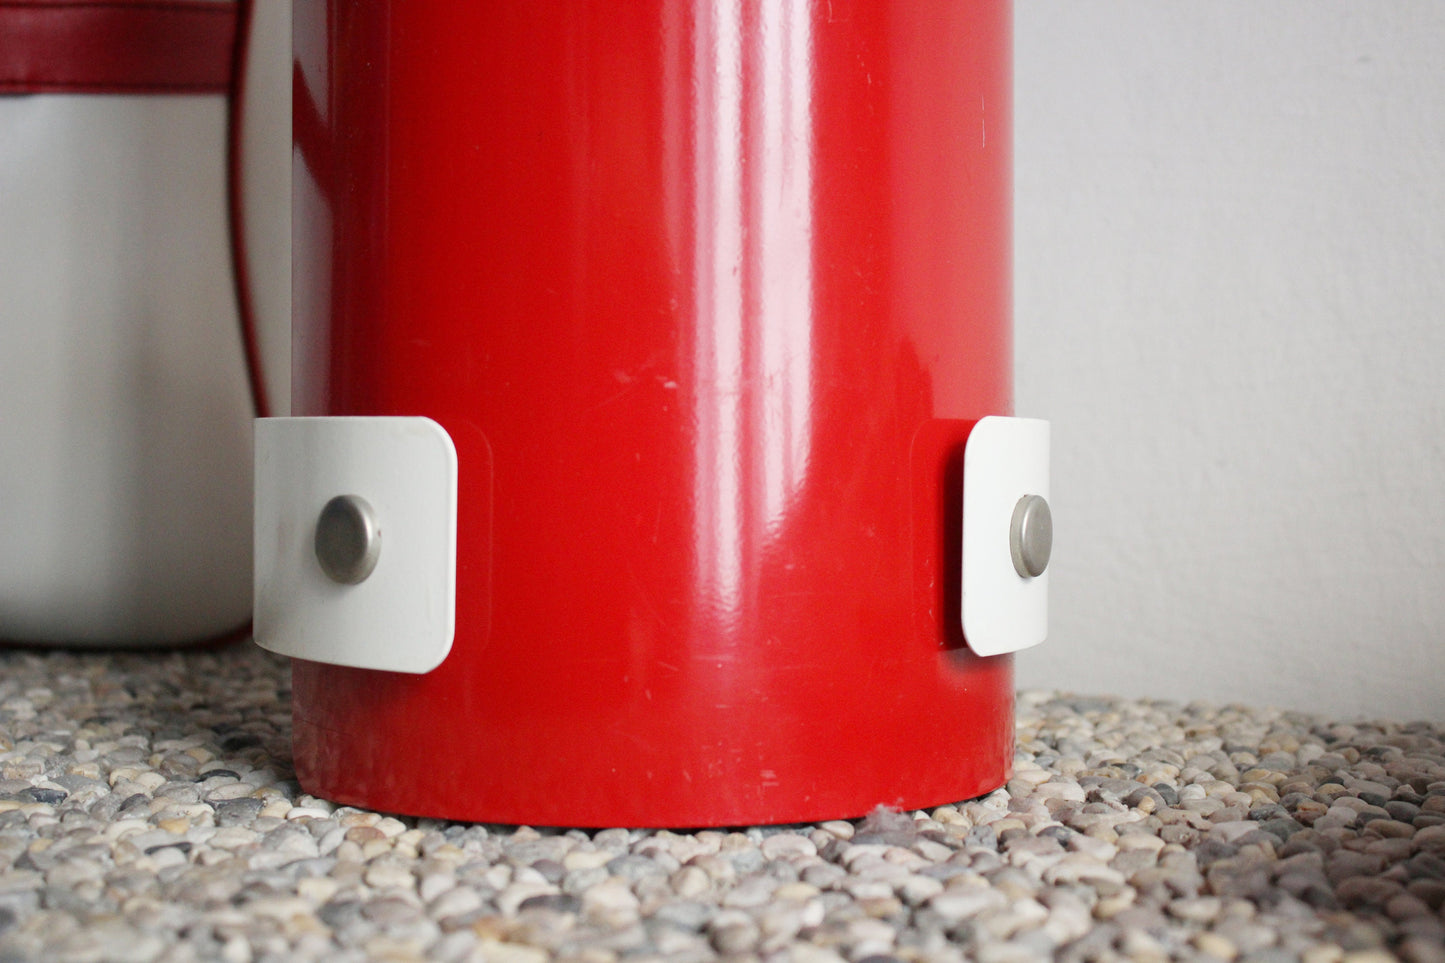 Vintage red and white Space age umbrella stand, 50s-60s mid-century design